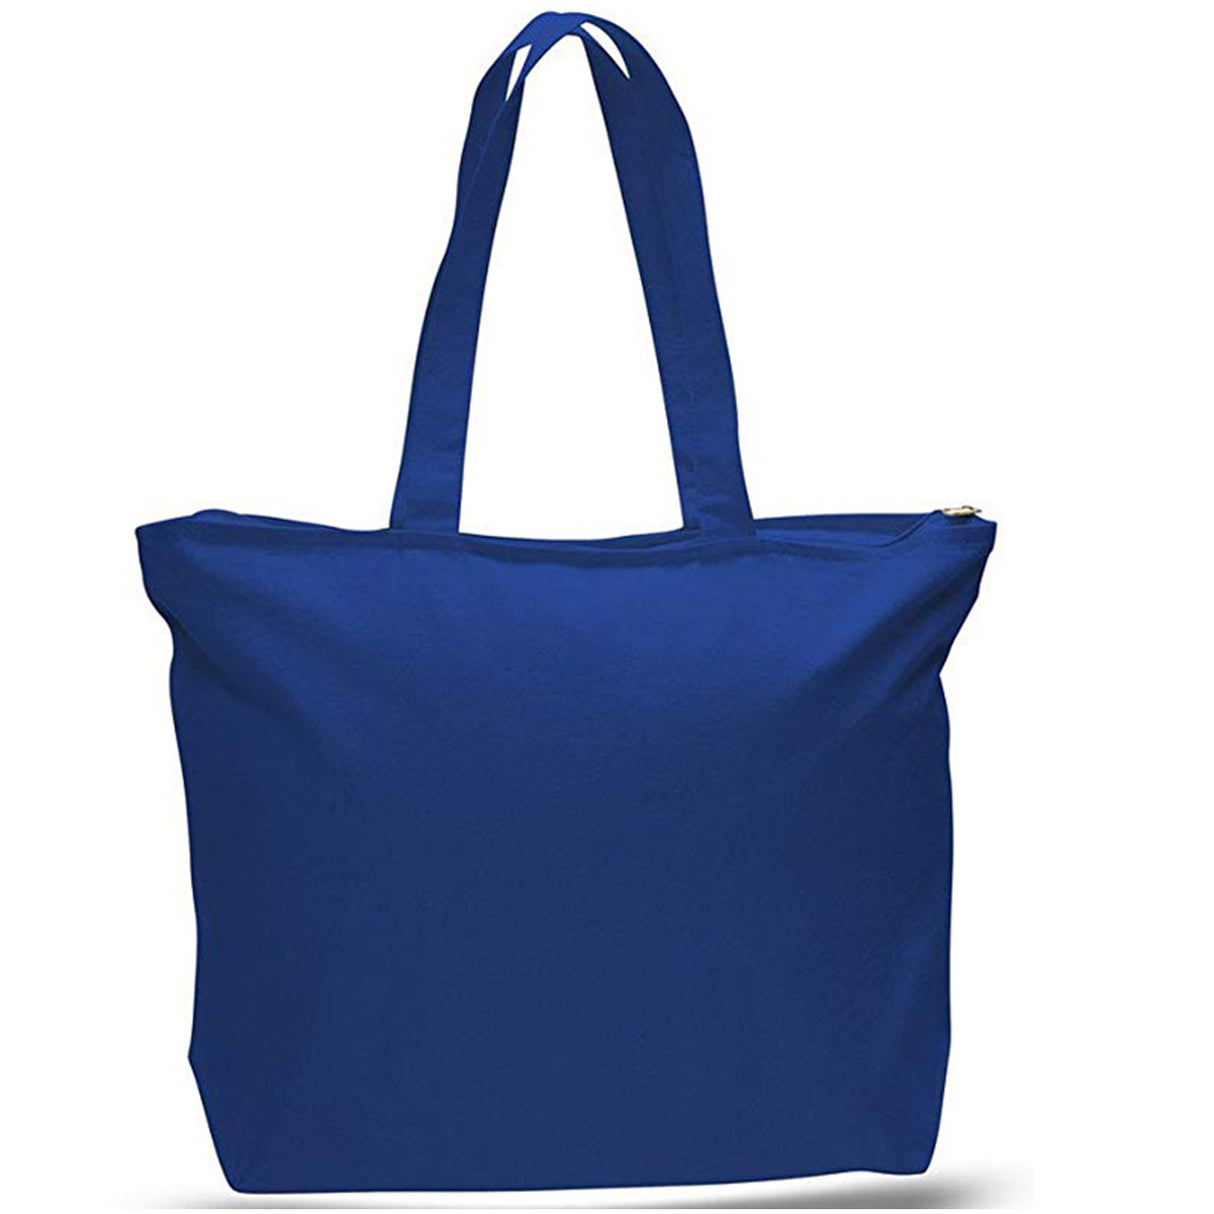 Basic Canvas Tote Bag With Zipper Pocket  - By Boat